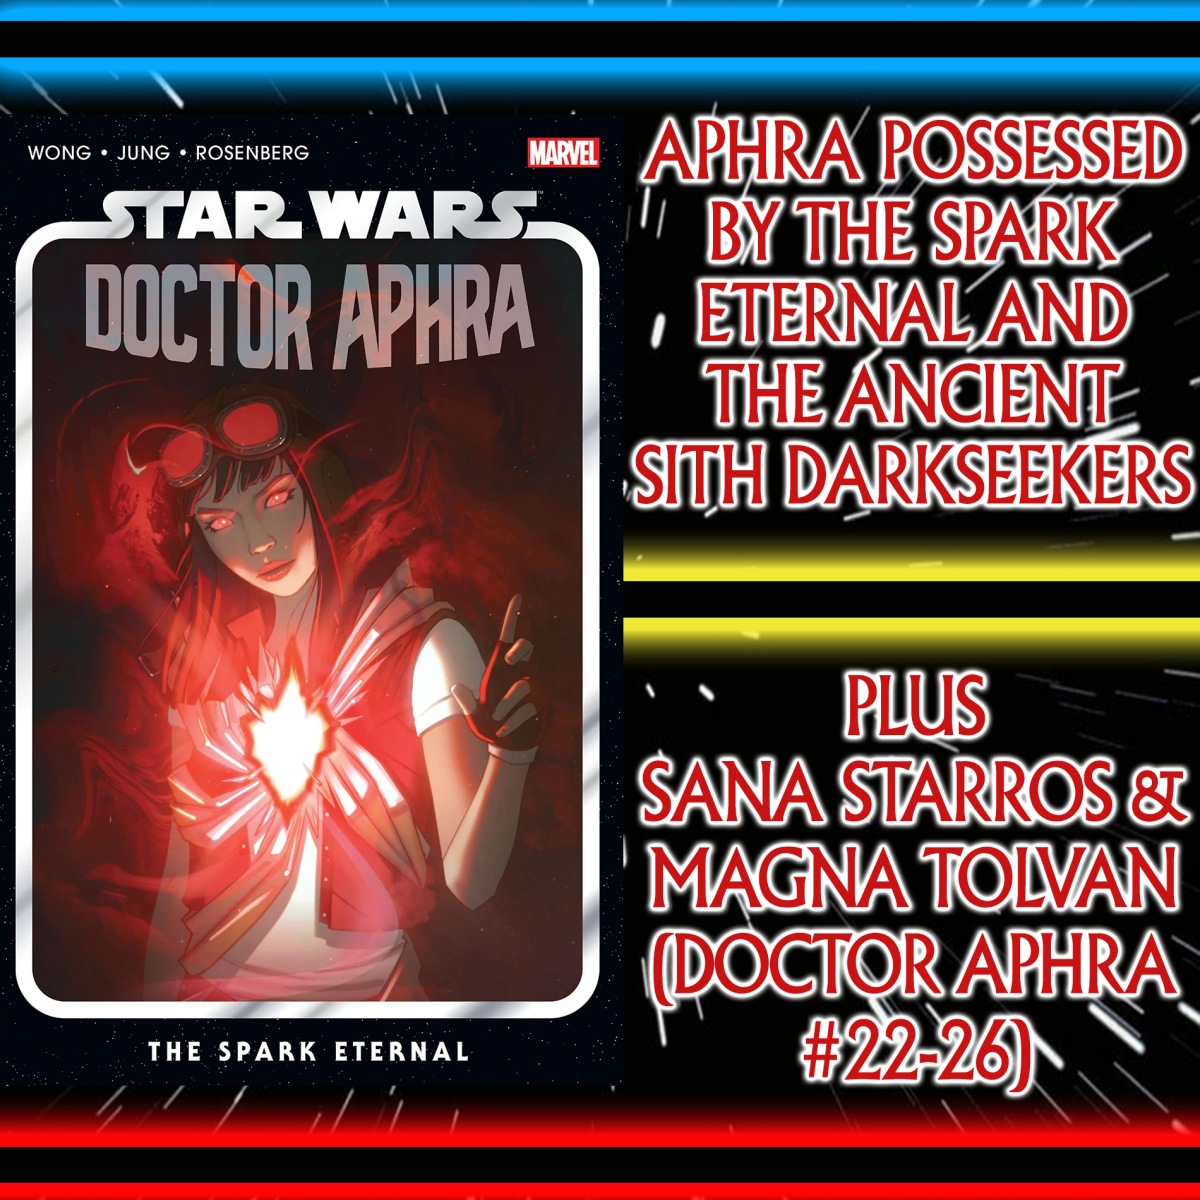 Doctor Aphra Is Possessed By The Spark Eternal, Plus Ancient Sith Darkseekers, Sana Starros & Magna Tolvan (Doctor Aphra [2020] Vol 6: Ascendant #22-26) – Ep 117